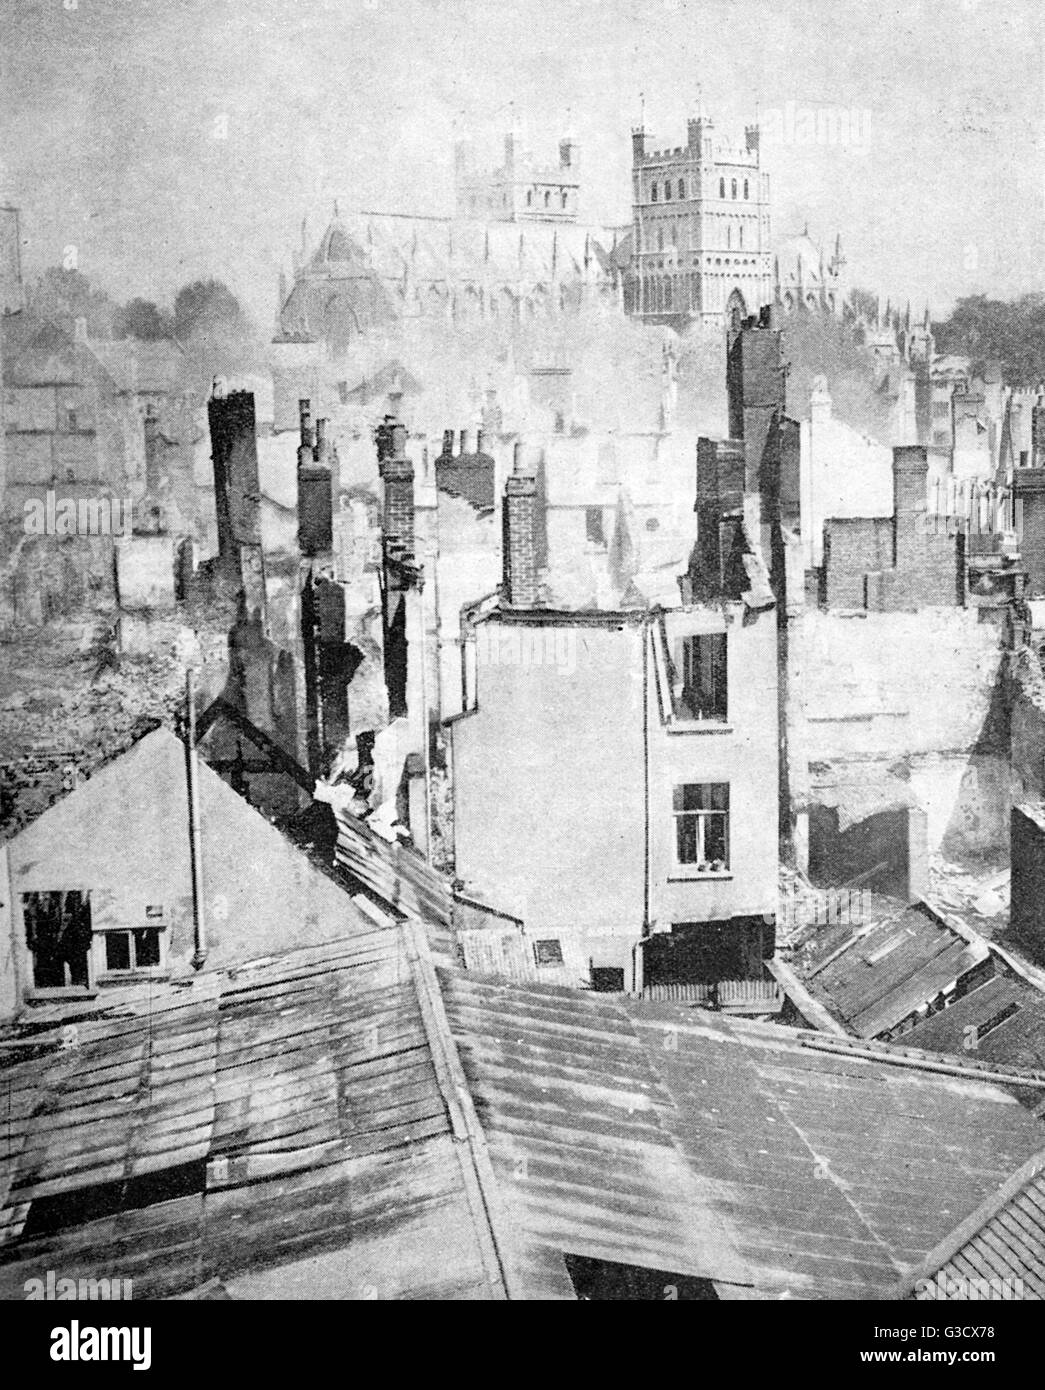 &quot;Exeter under fire&quot; - Damage sustained by bombing on the city by German planes of the luftwaffe during WW2. The Baedeker Blitz (or Baedeker raids) were targetted raids, chosen for hitting sites of cultural or historical significance, rather than Stock Photo